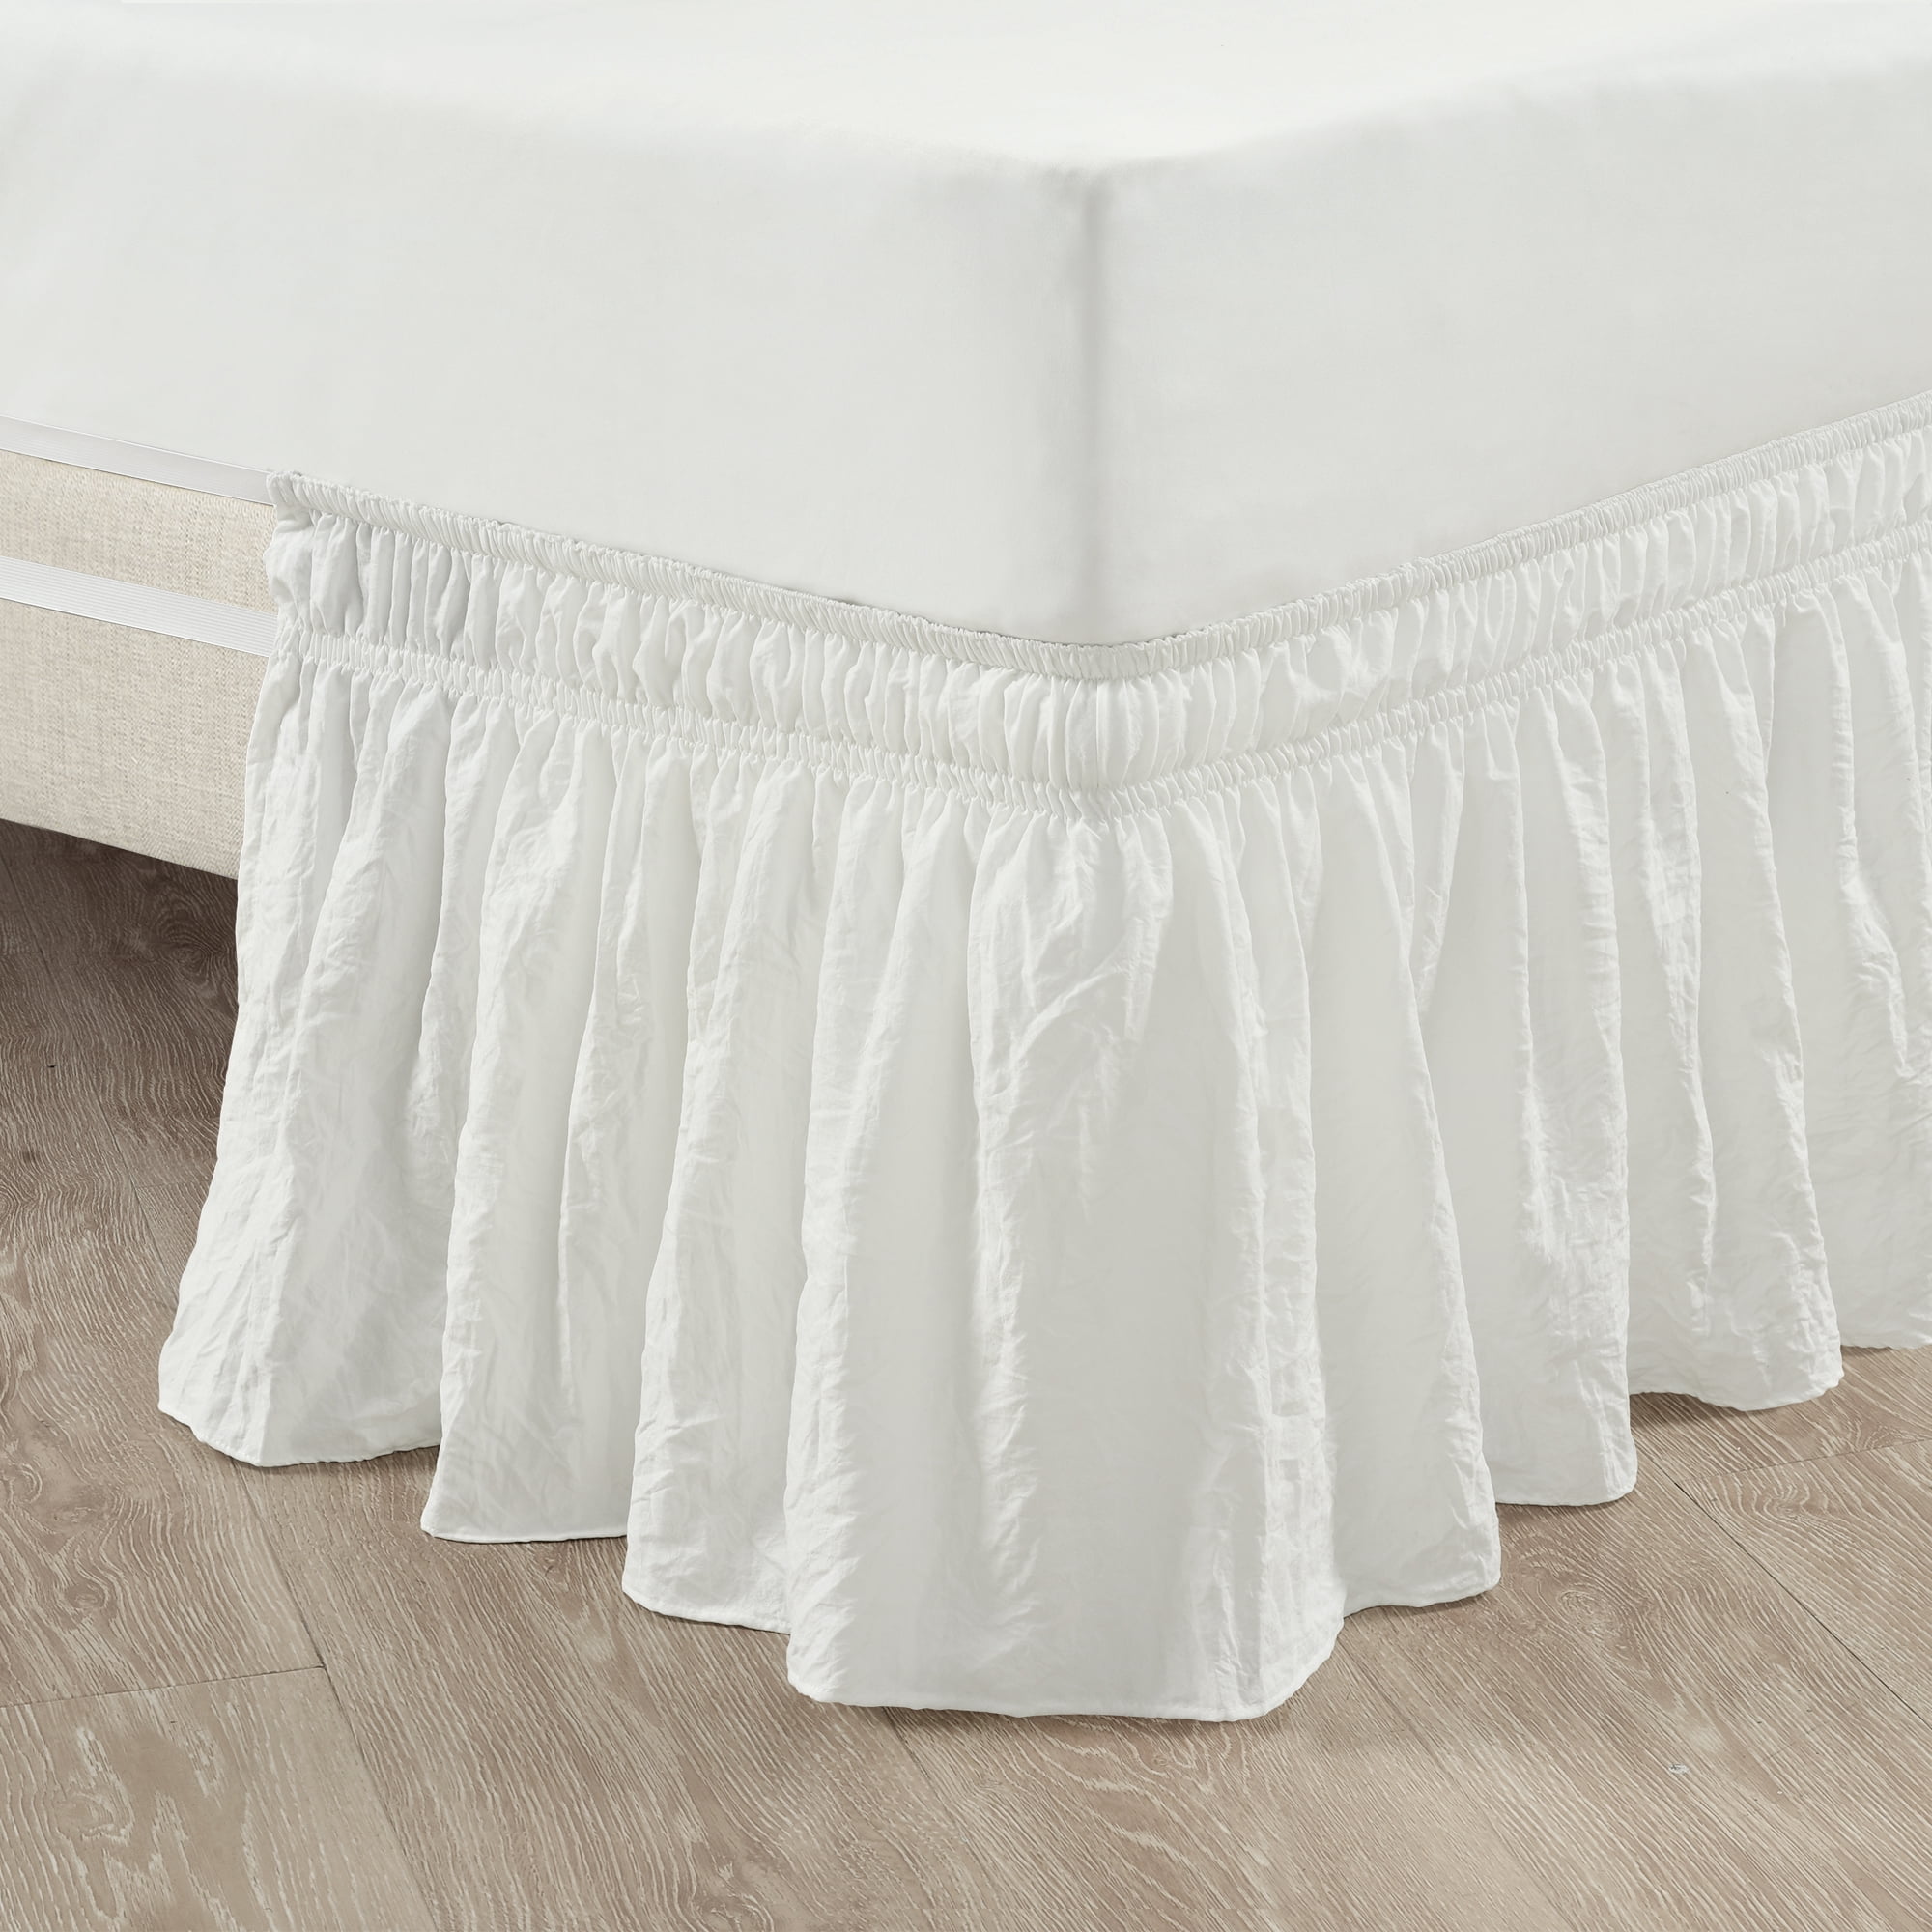 Solid Elastic Lace Bed Skirt Embroidery Bedding Decor Full/Queen/King Size Home